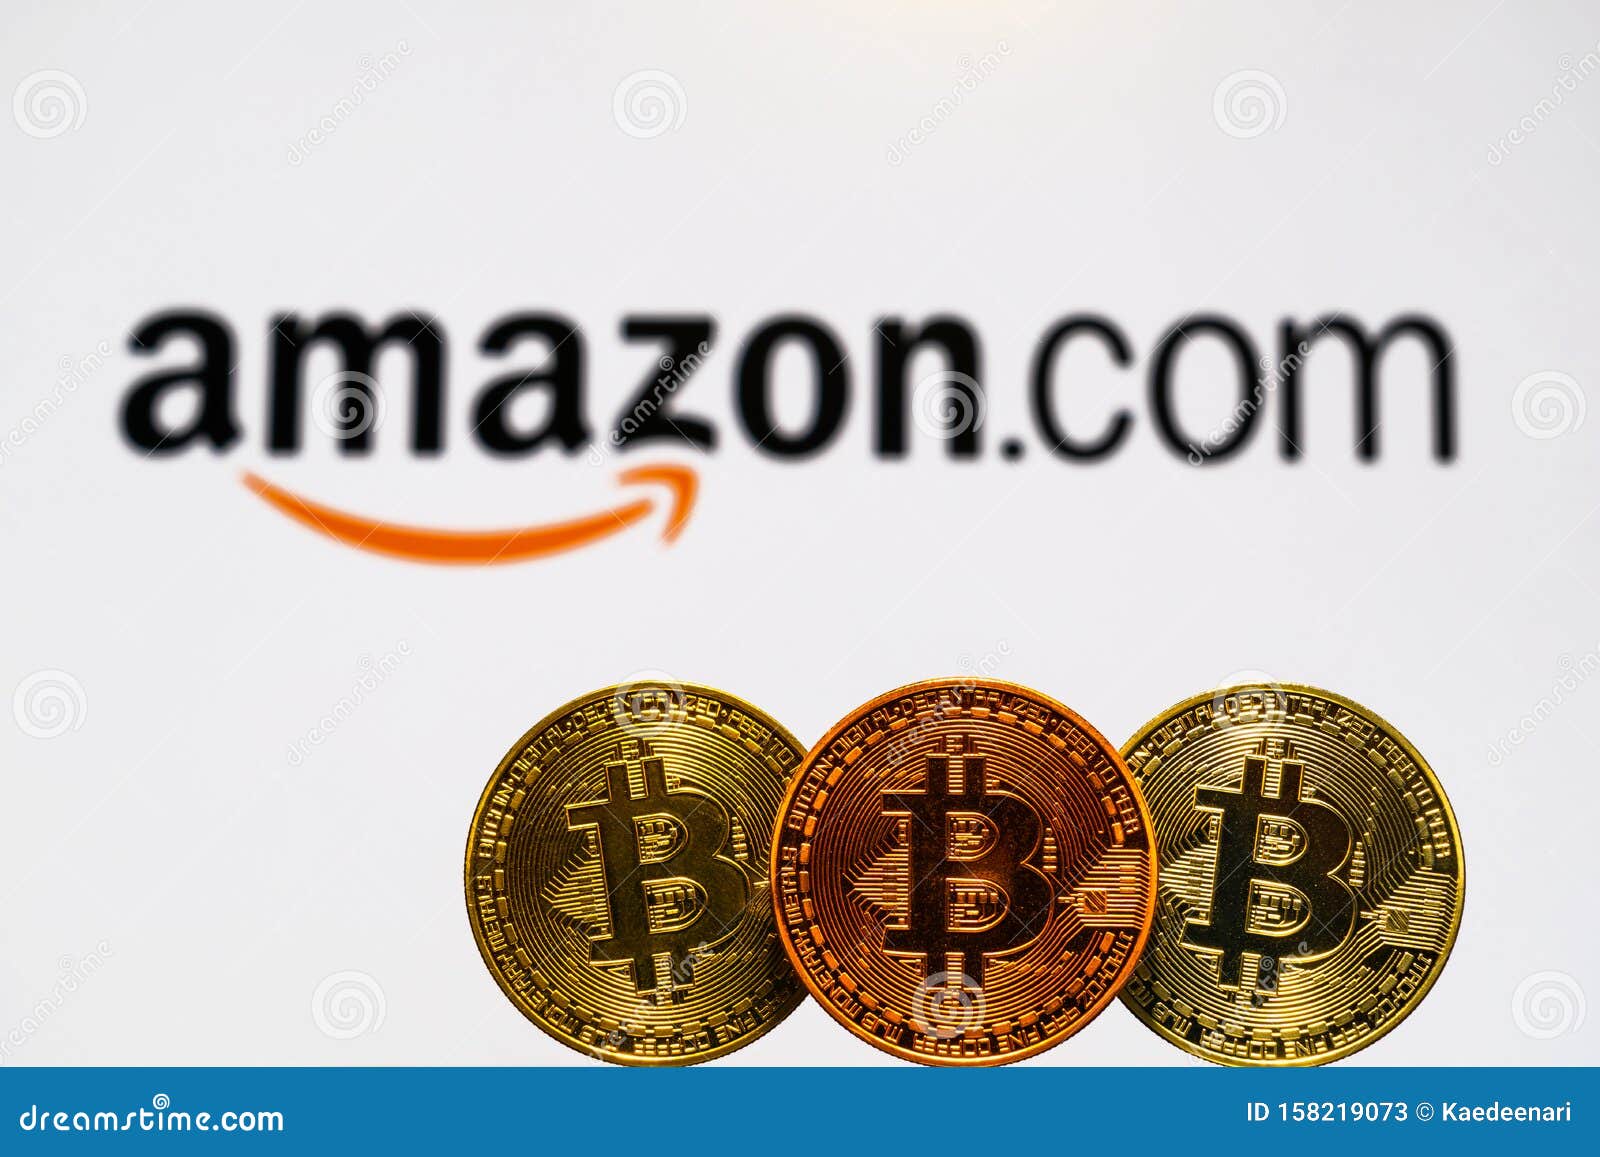 how to buy in amazon with bitcoin